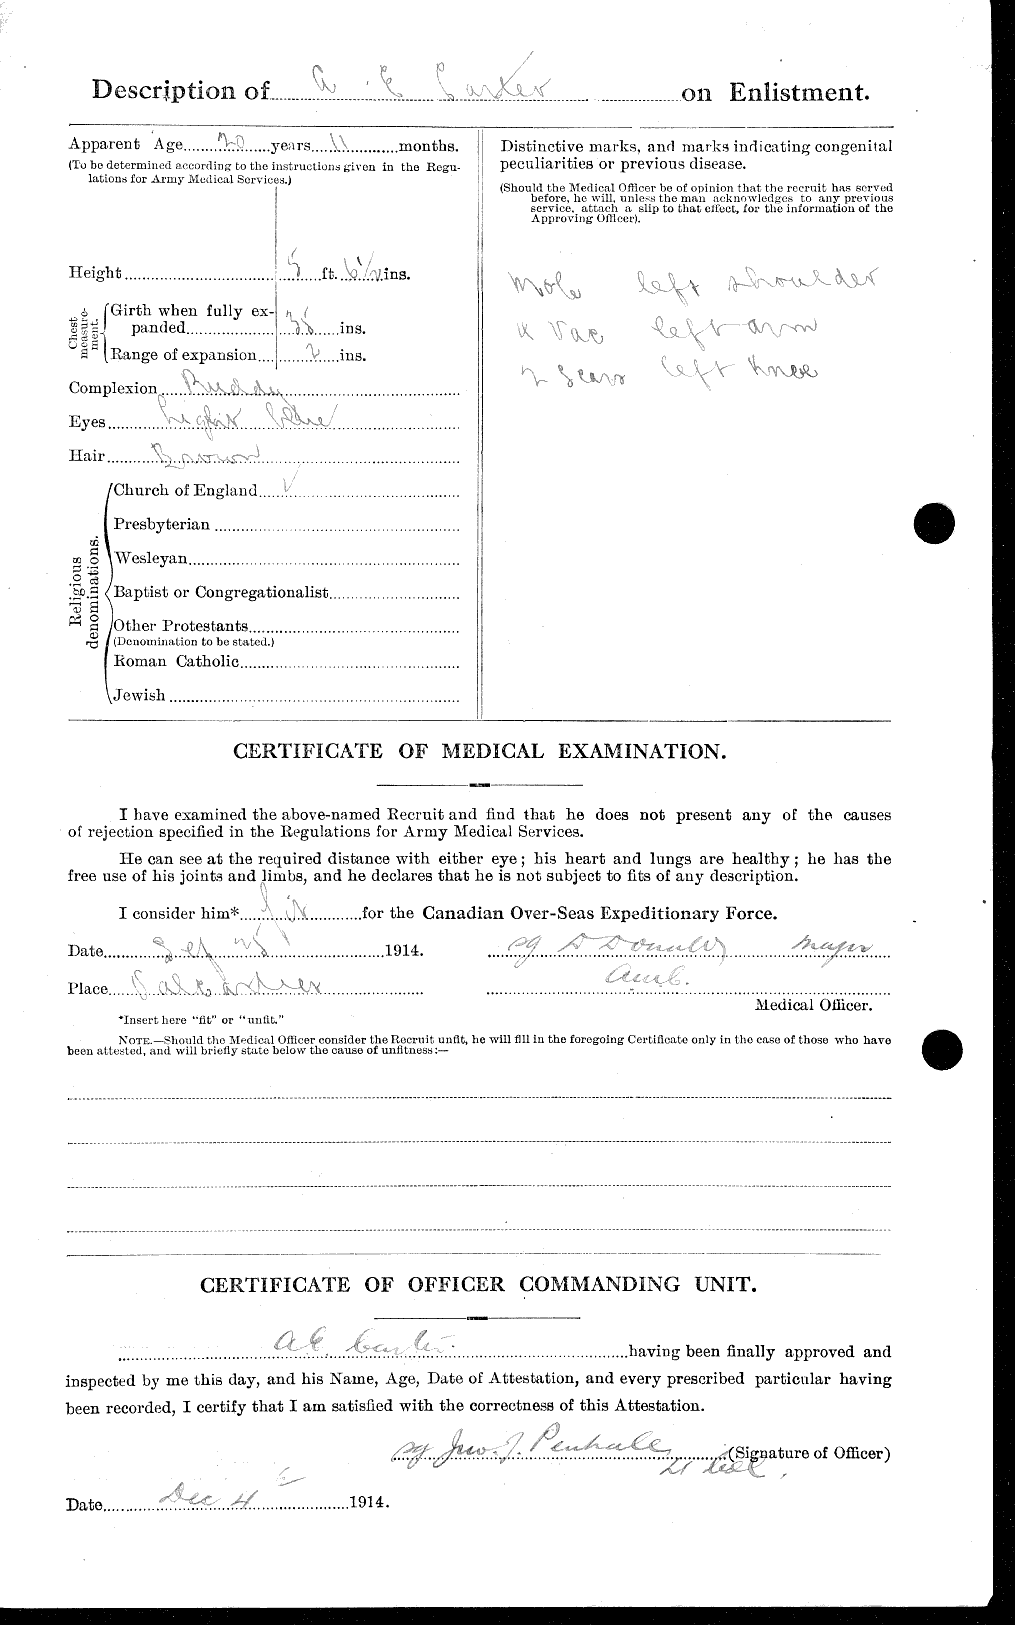 Personnel Records of the First World War - CEF 010900b